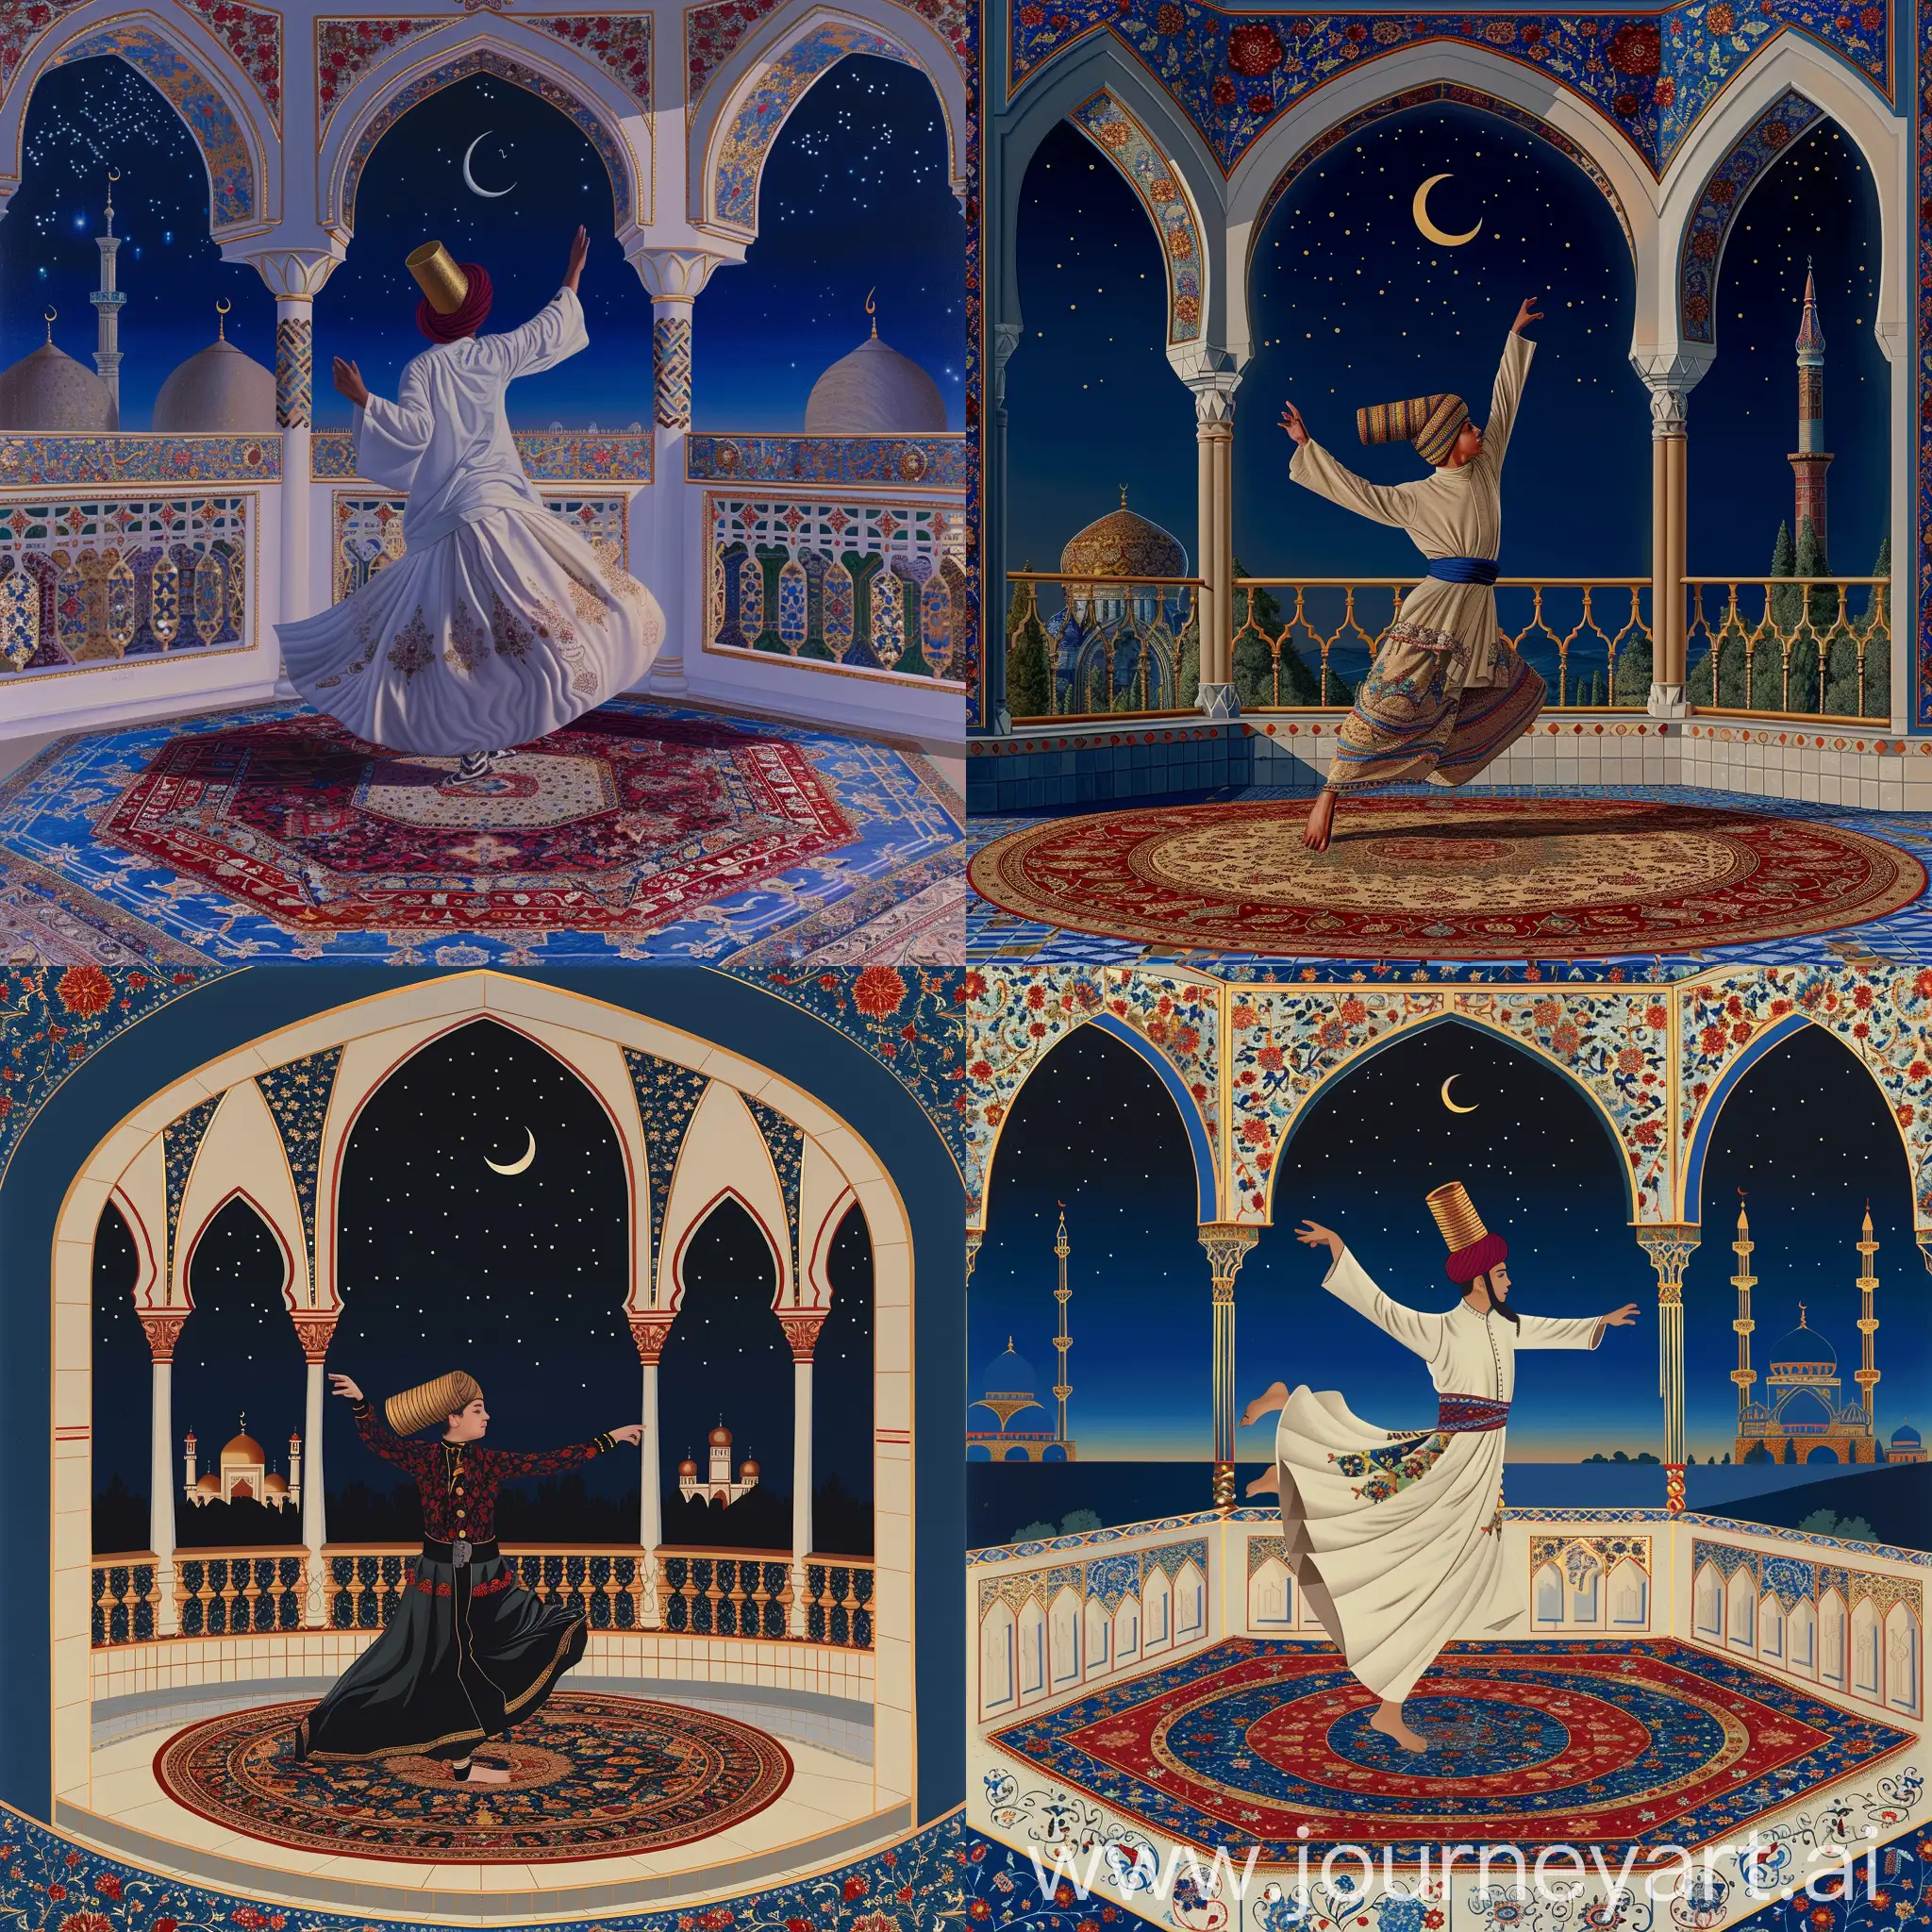 British-Dervish-Performing-Sufi-Whirling-Dance-on-Persian-Carpet-in-Octagonal-Balcony